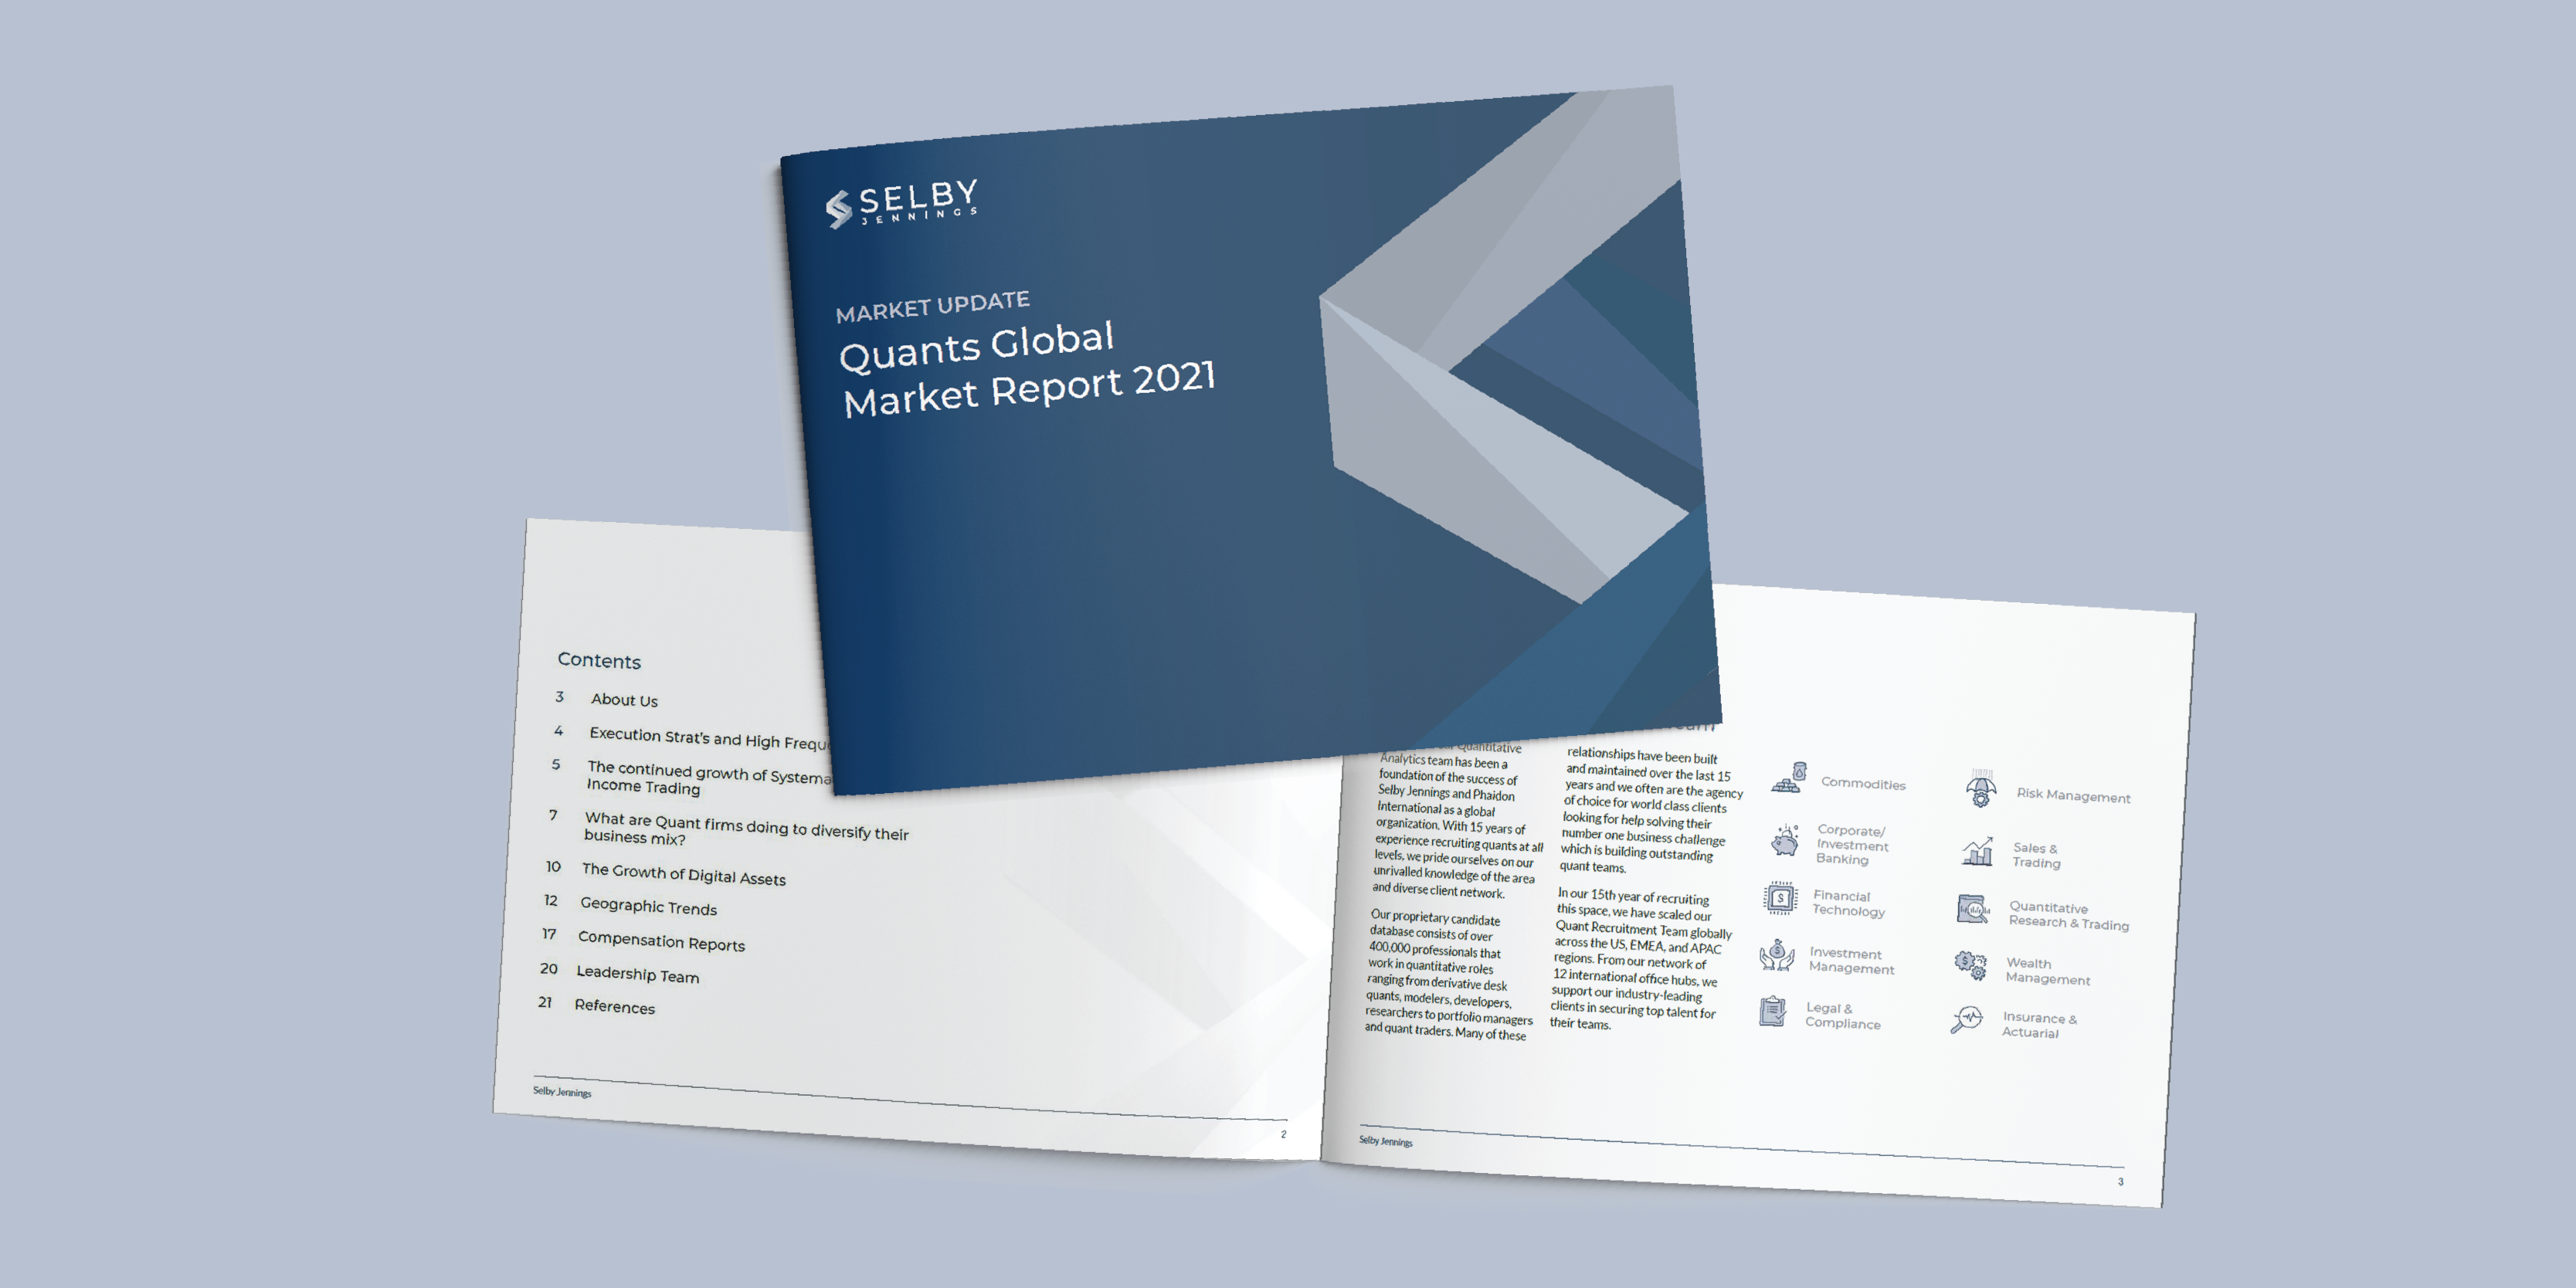 Download: Selby Jennings Quants Global Market Report 2021